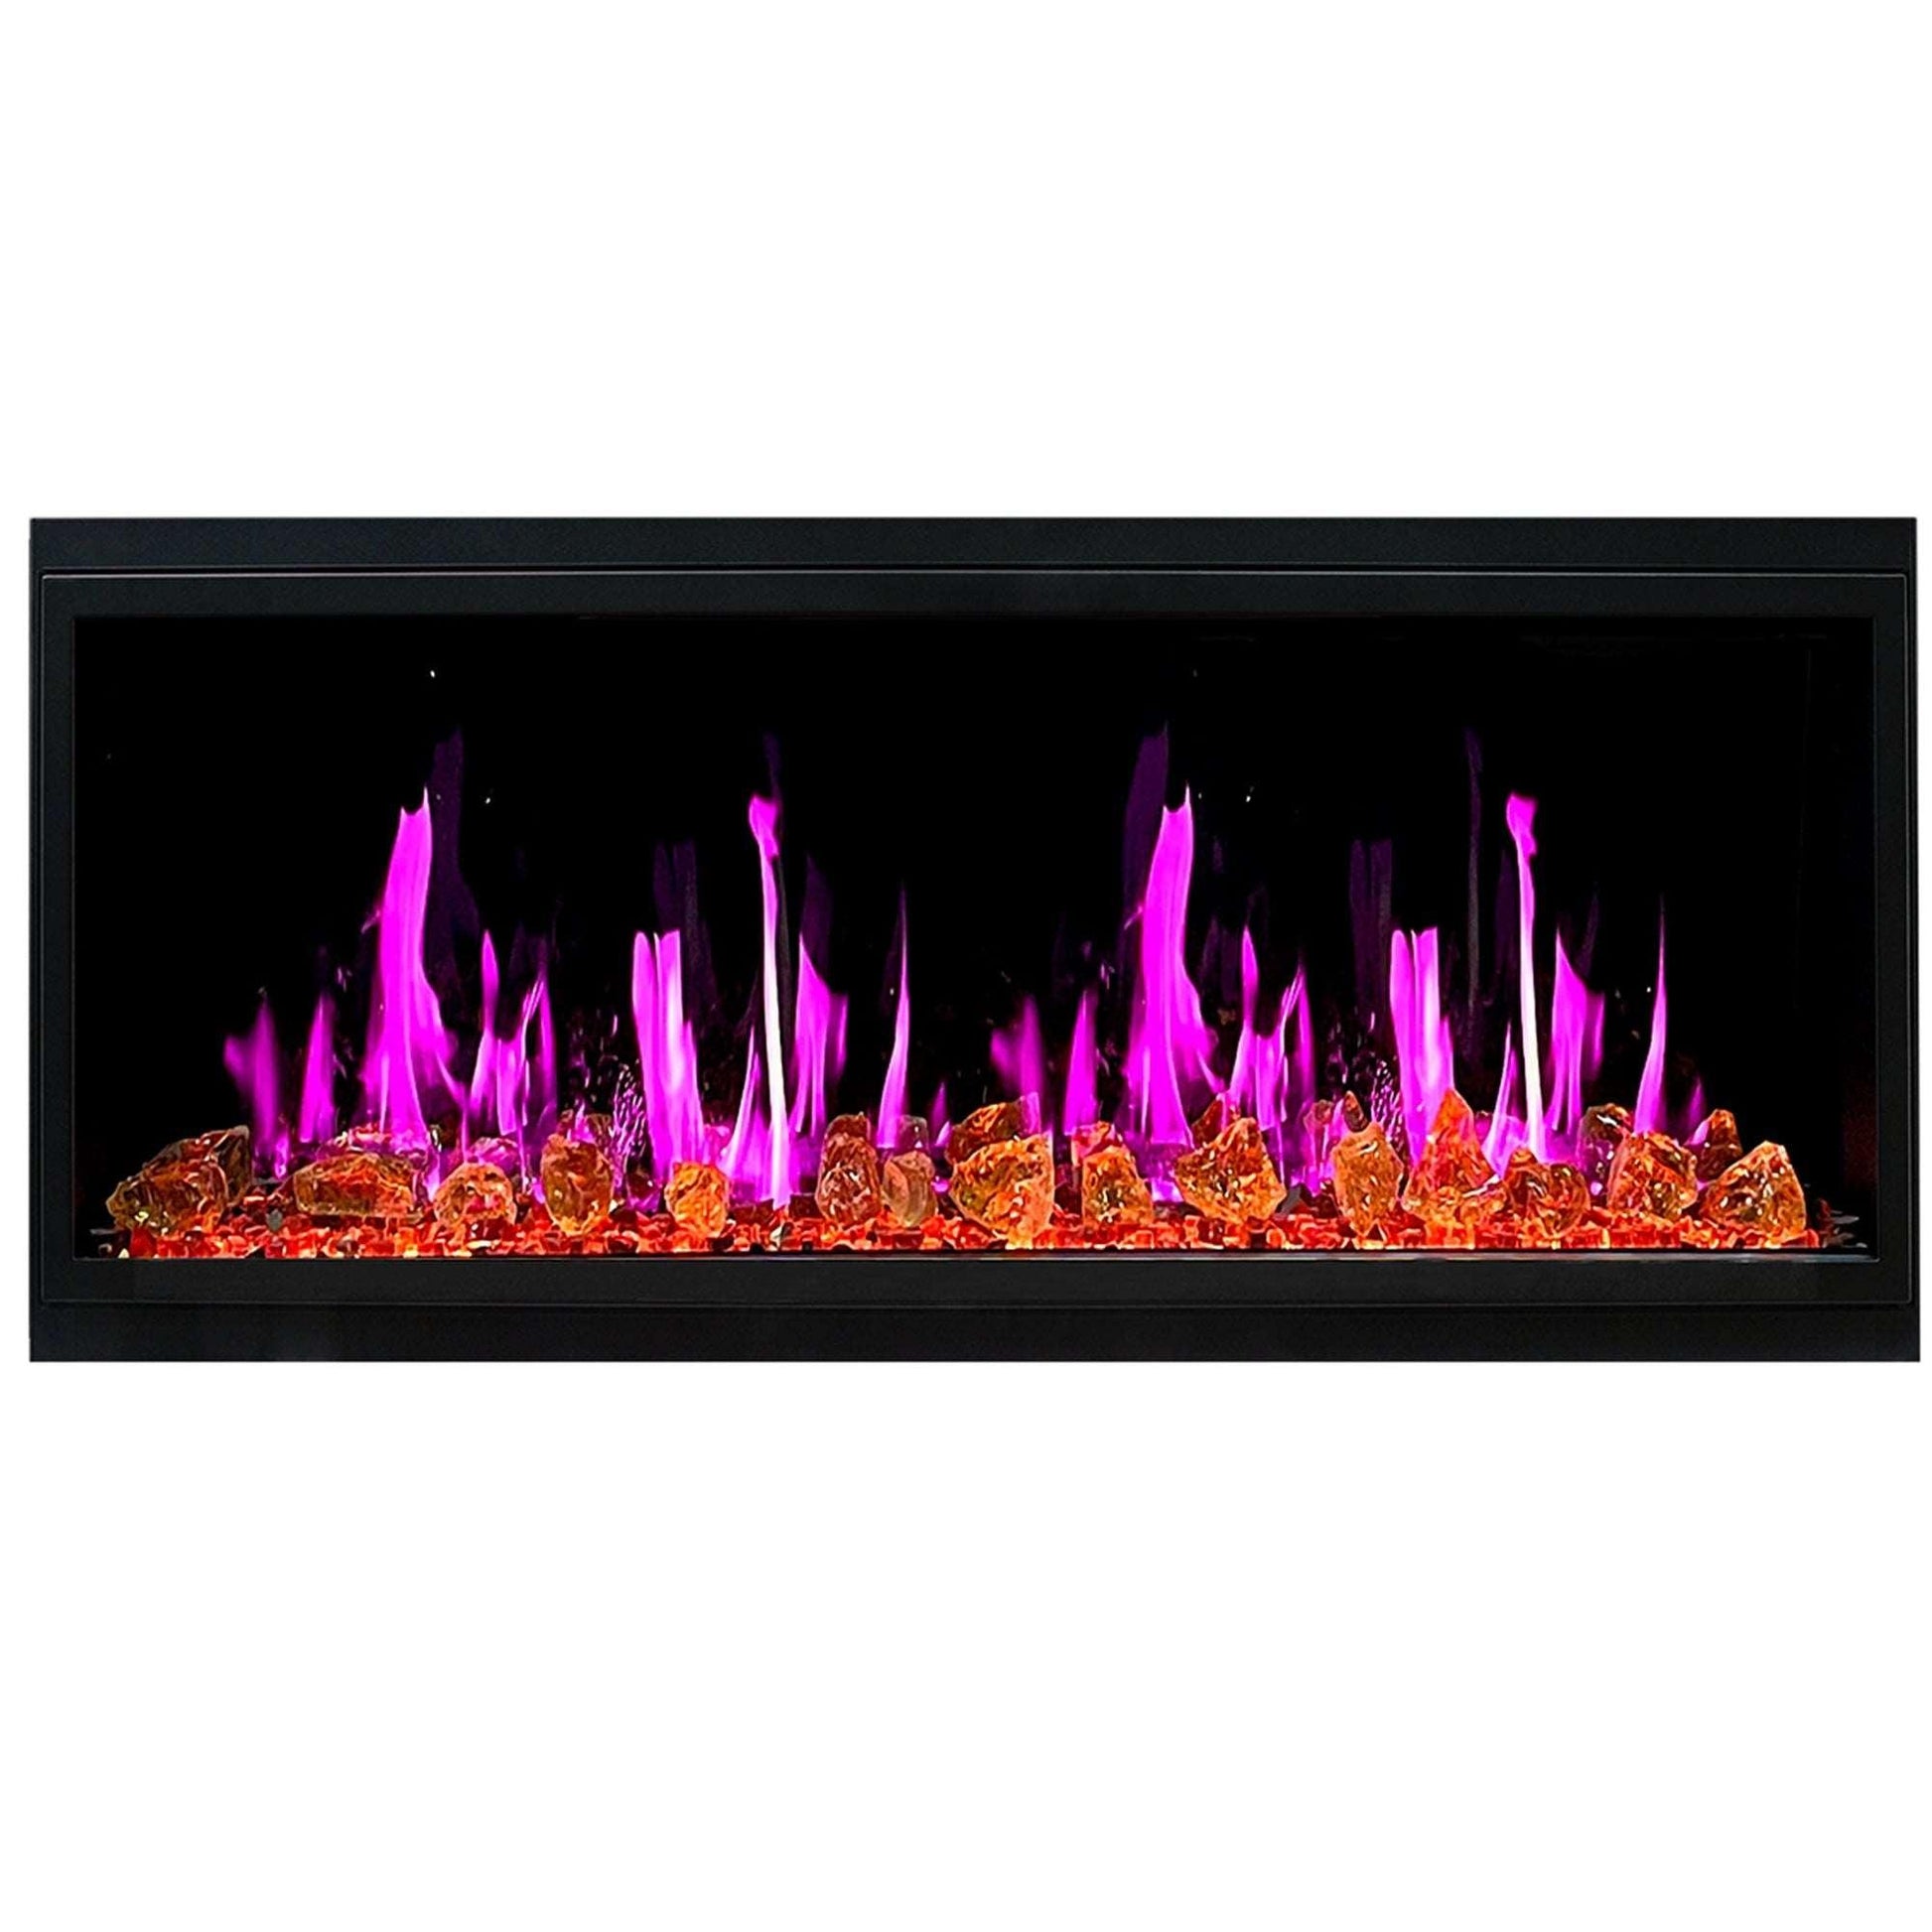 ZopaFlame™ 45" Linear Built-in Electric Fireplace - BG17455X - ZopaFlame Fireplaces